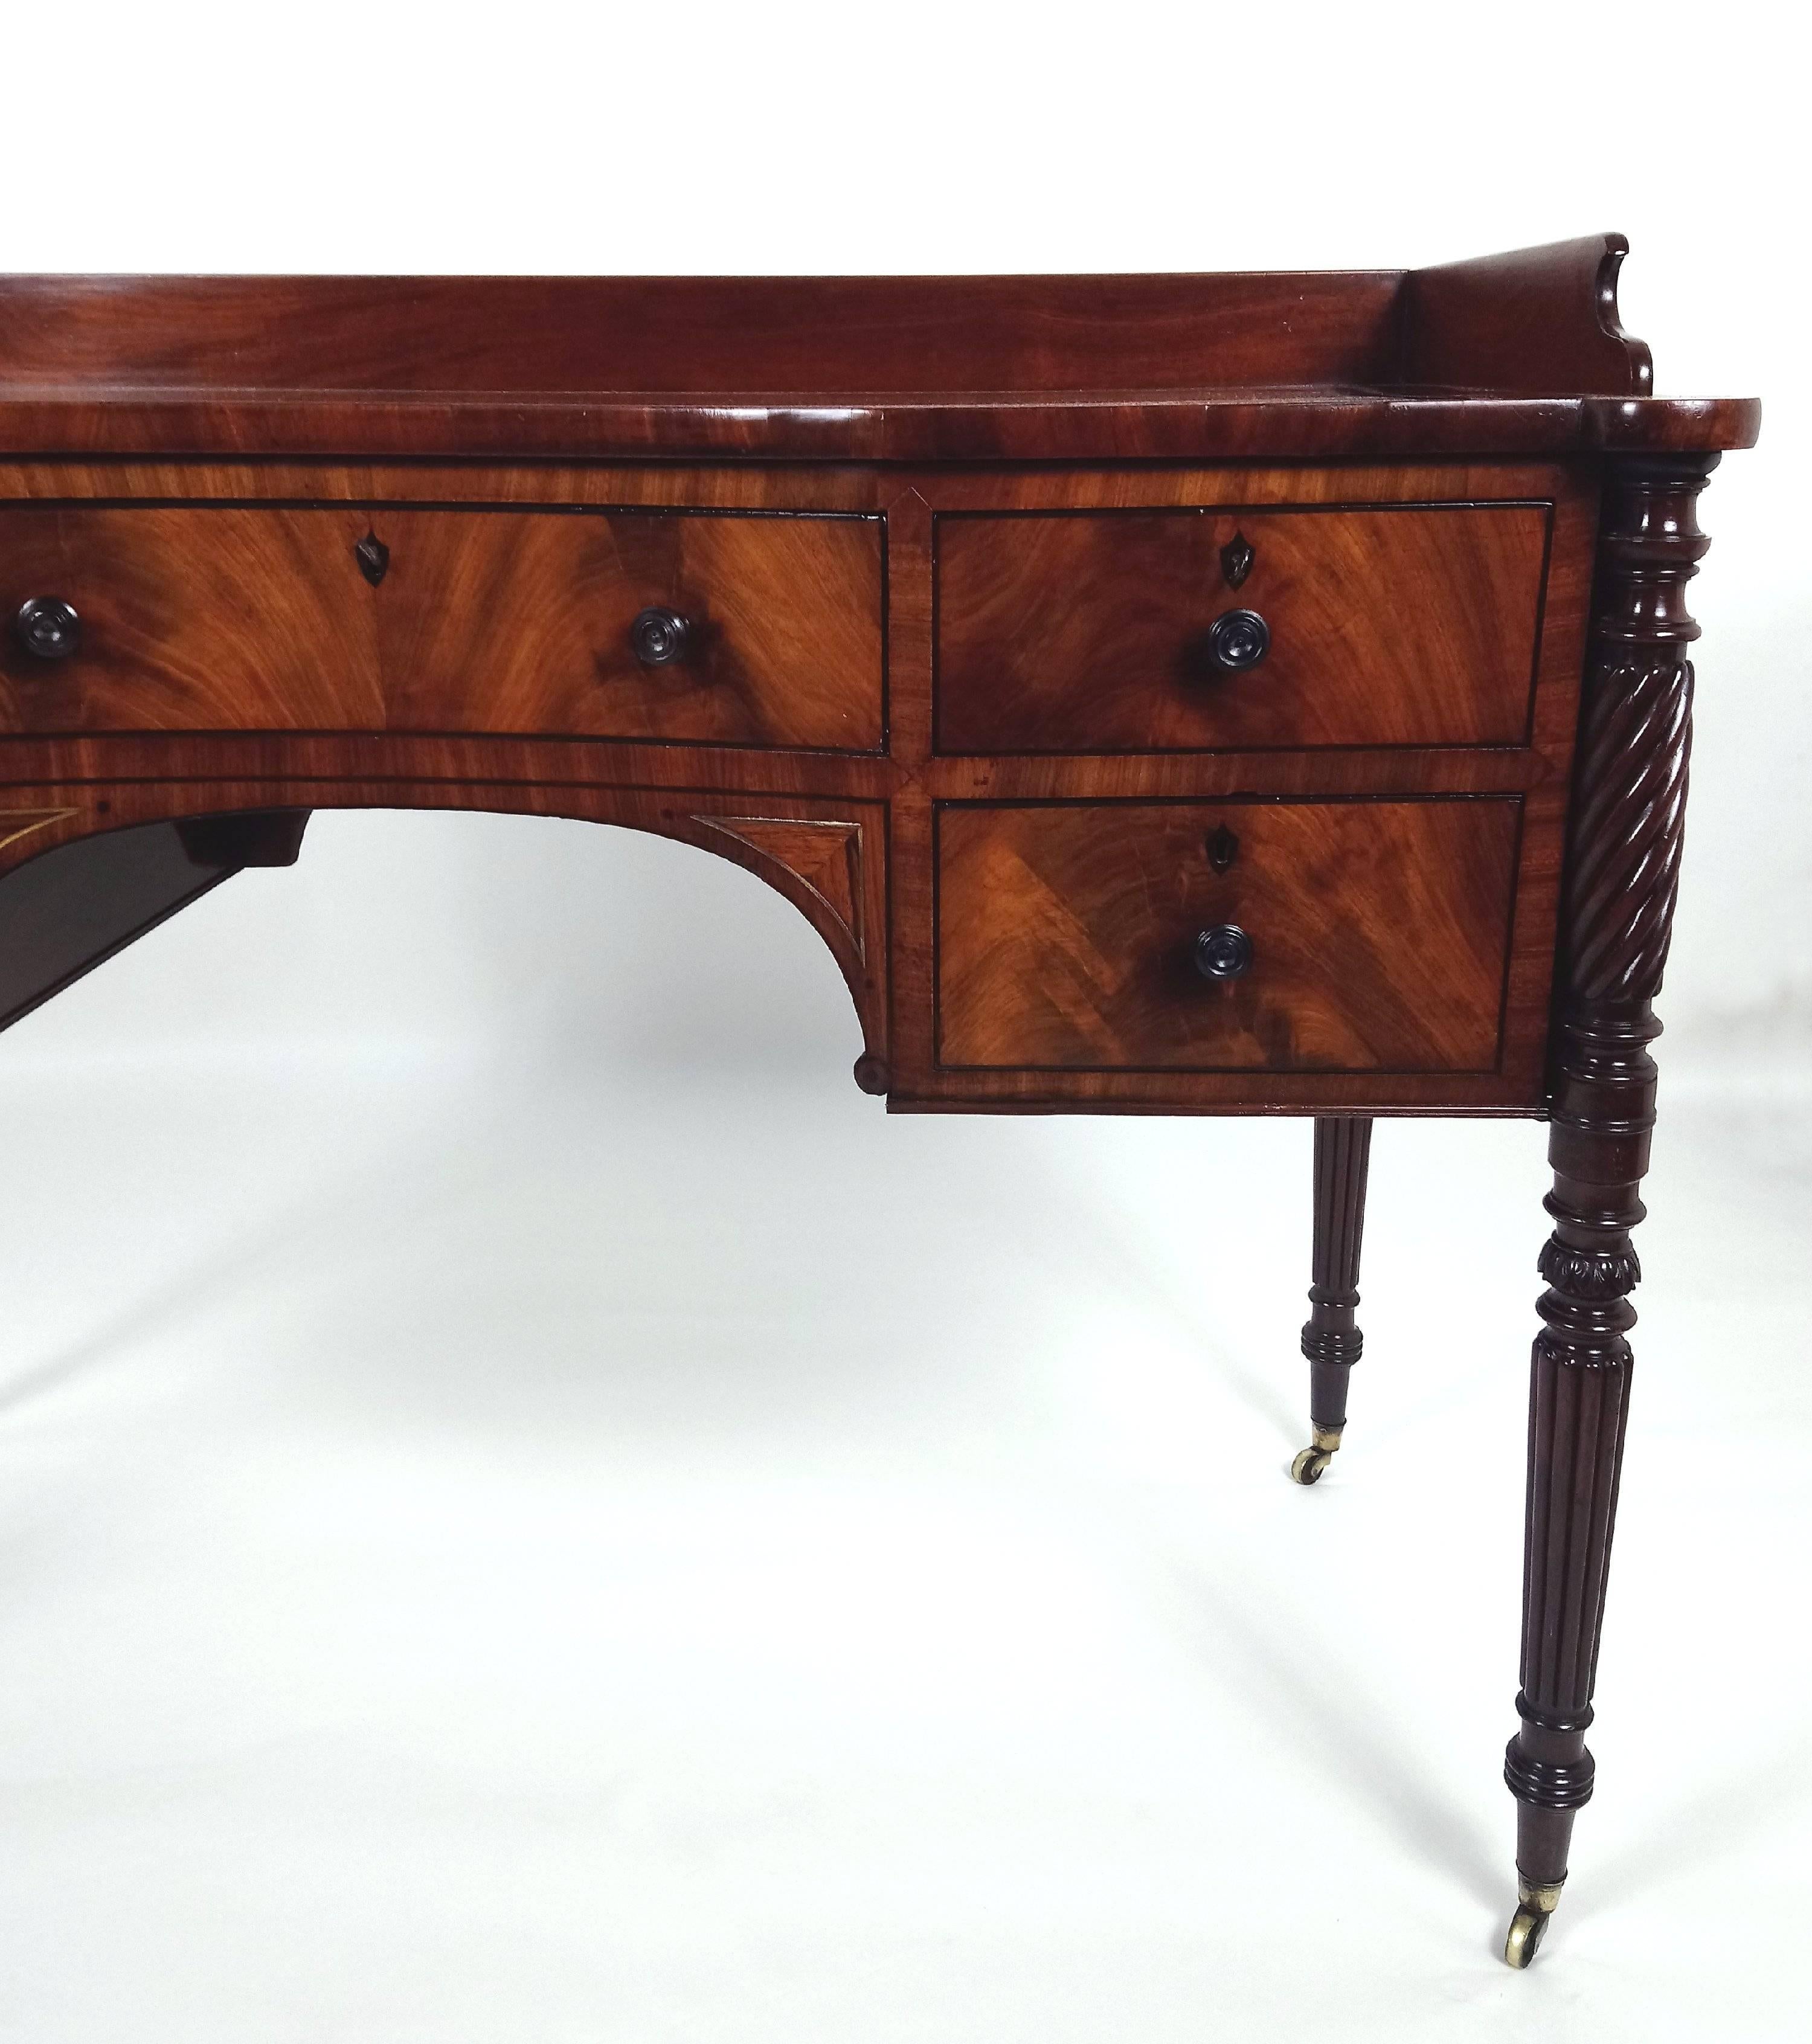 This fine quality and handsome late Regency figured mahogany knee-hole sideboard features a central drawer with two drawers to each side. The side table has a concave shaped knee-hole on reeded and carved supports with brass and ebony inlaid